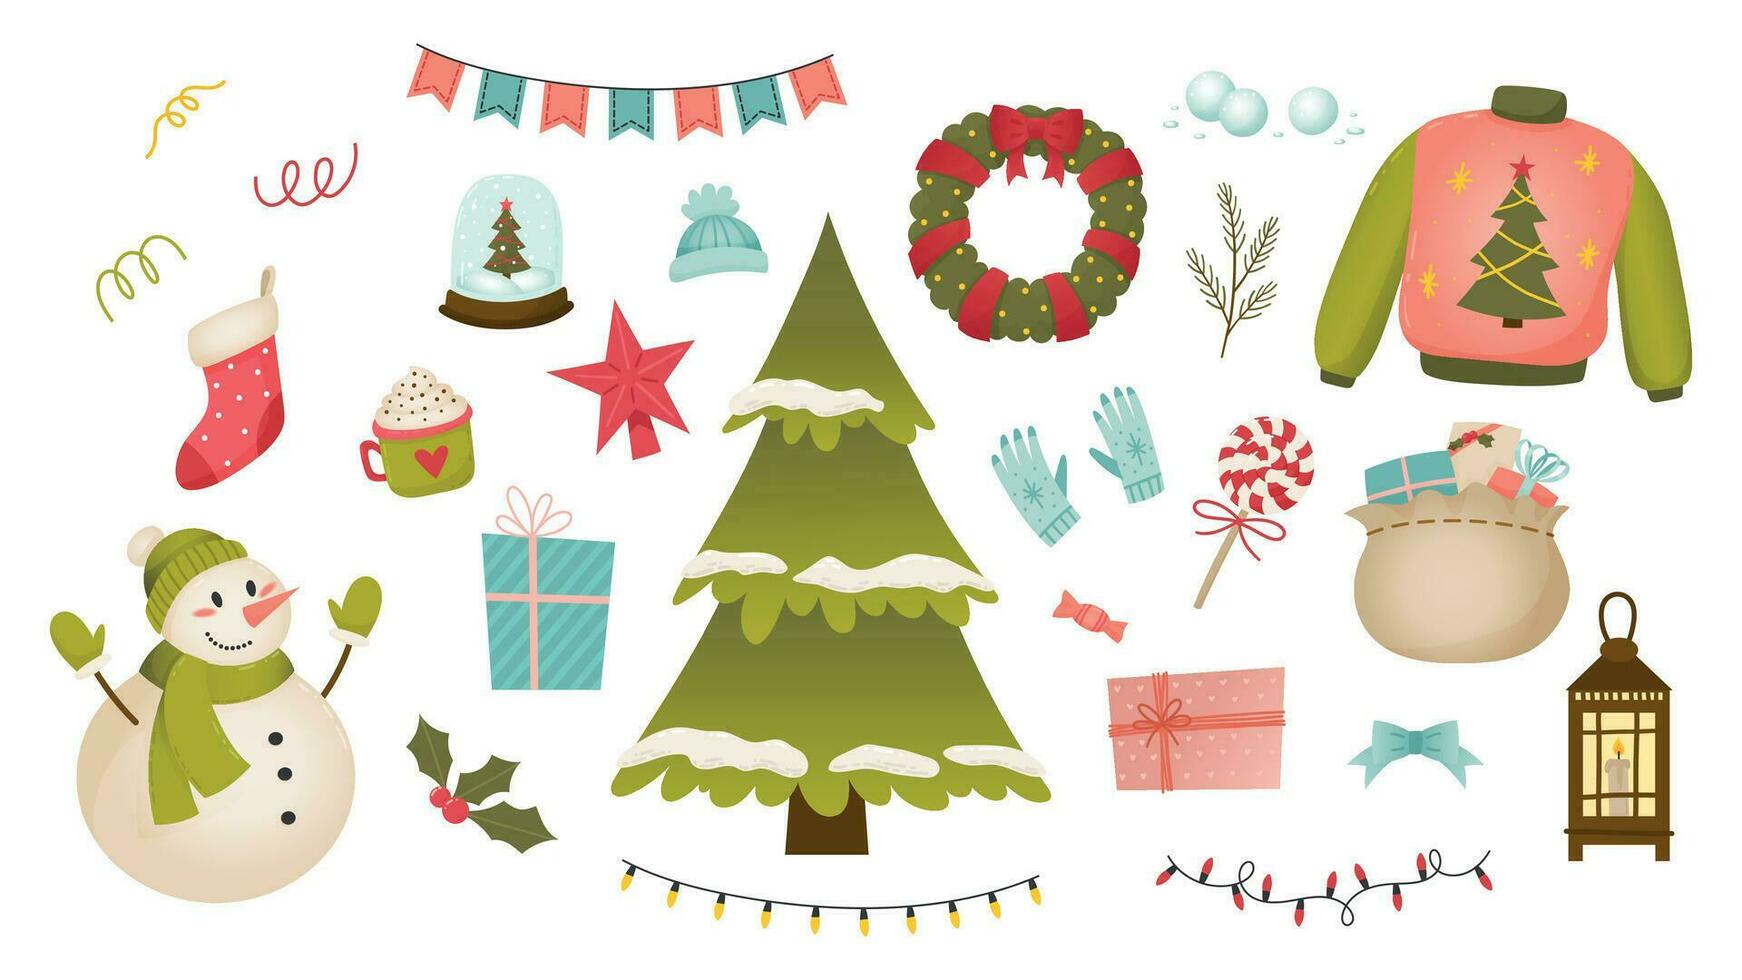 Set of cute cartoon Christmas and New Year elements with Christmas tree, garlands, wreath, holly, snowman, lantern, stocking, sweater, star, gifts, candy, lights vector